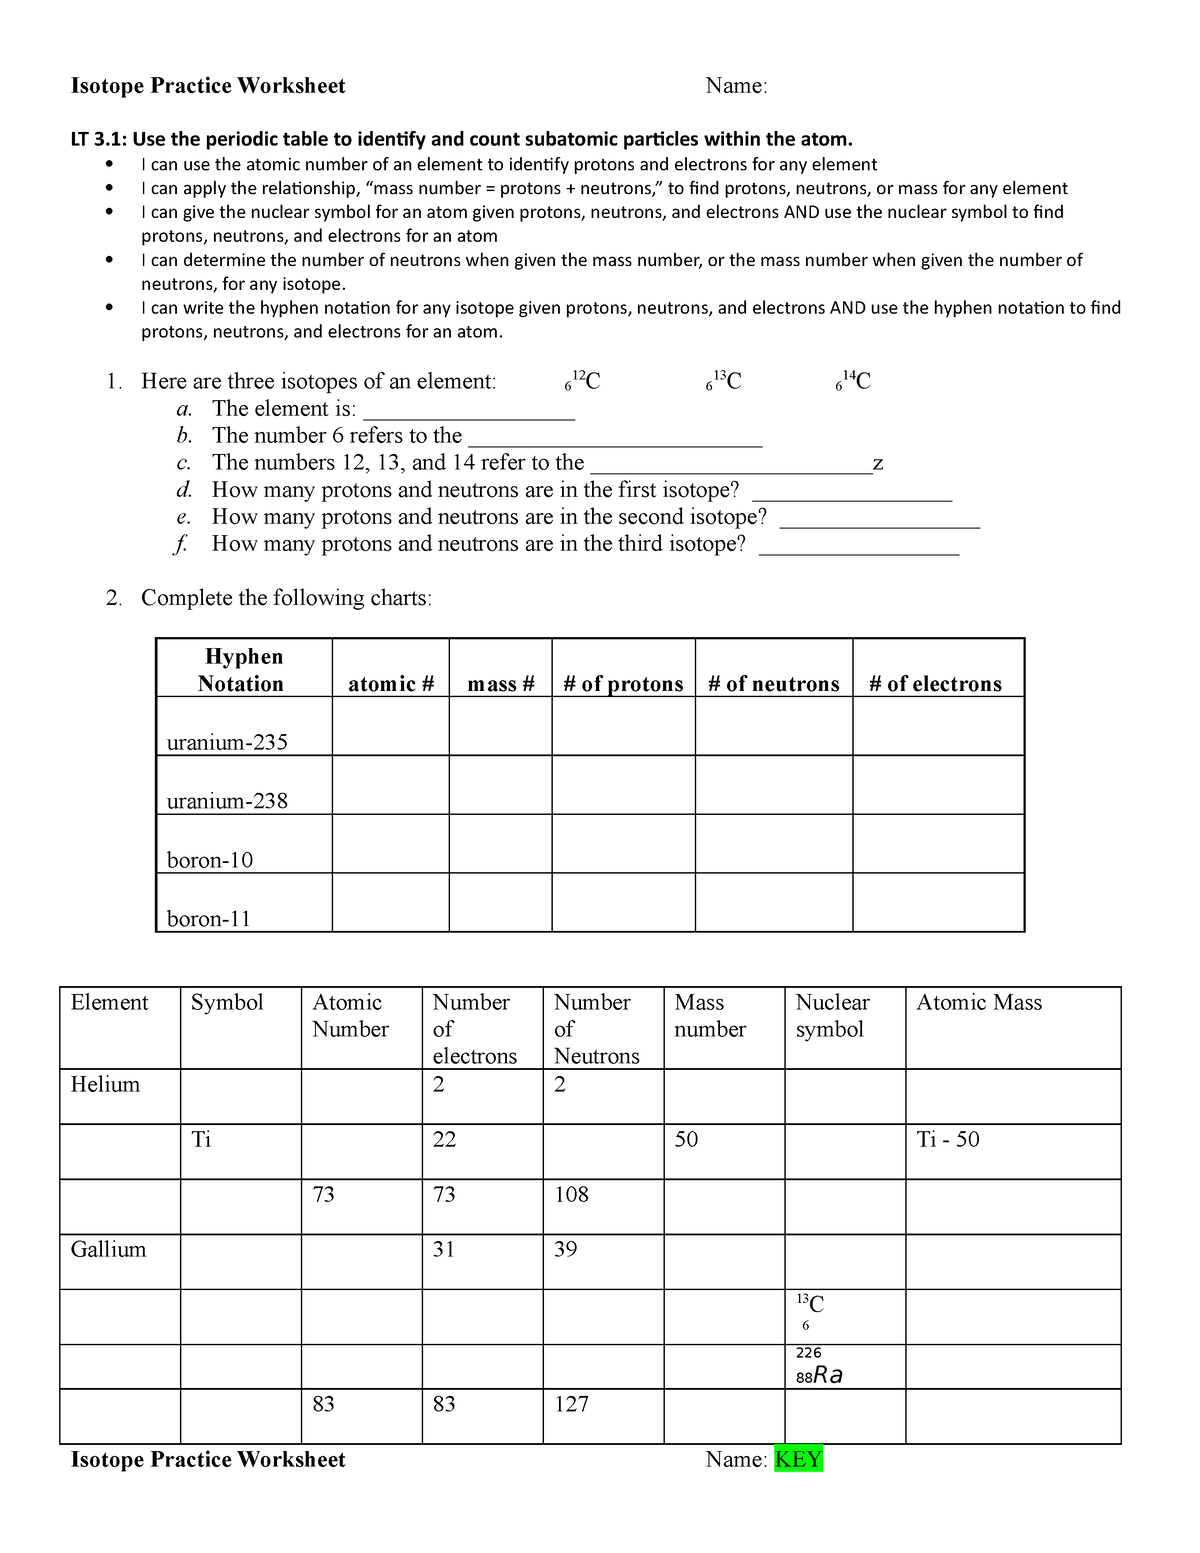 w-isotope-practice-and-key-isotope-practice-worksheet-name-lt-3-use-the-periodic-table-to